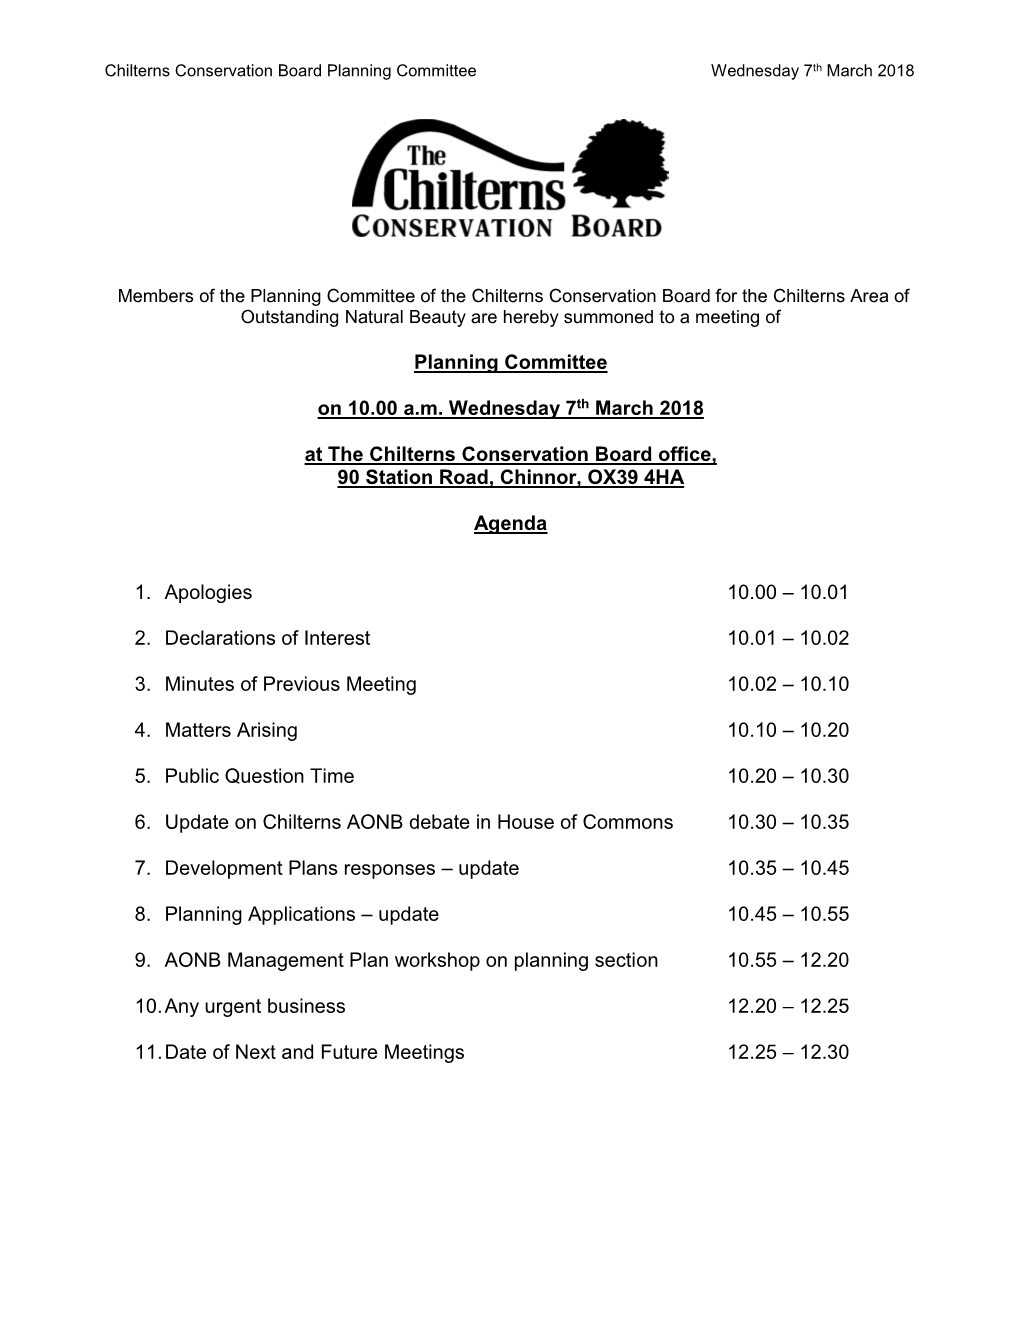 Members of the Planning Committee of the Chilterns Conservation Board for the Chilterns Area of Outstanding Natural Beauty Are Hereby Summoned to a Meeting Of